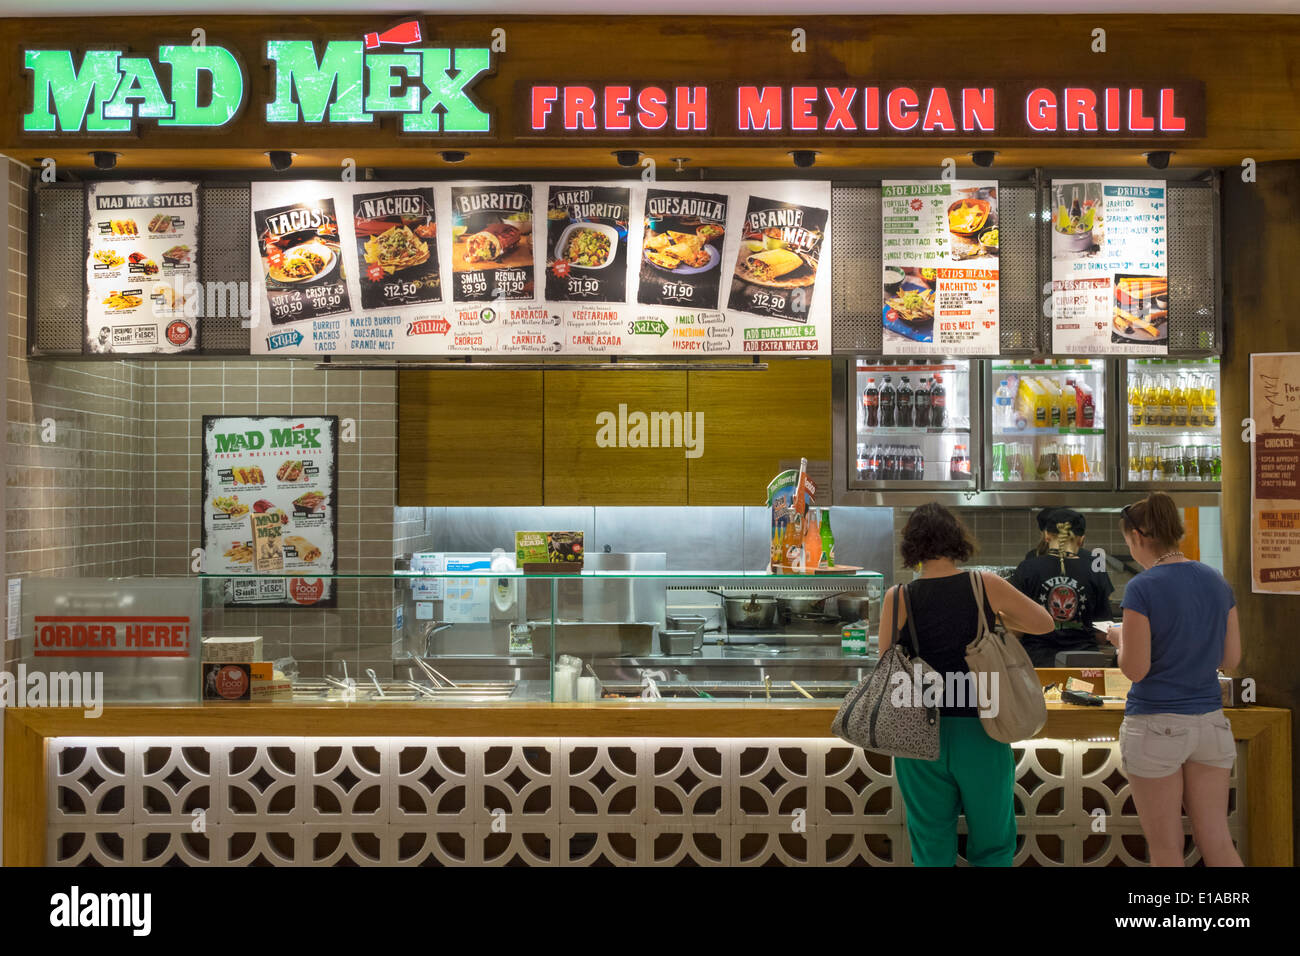 Mad Mex Fresh Mexican Grill High Resolution Stock Photography and Images -  Alamy